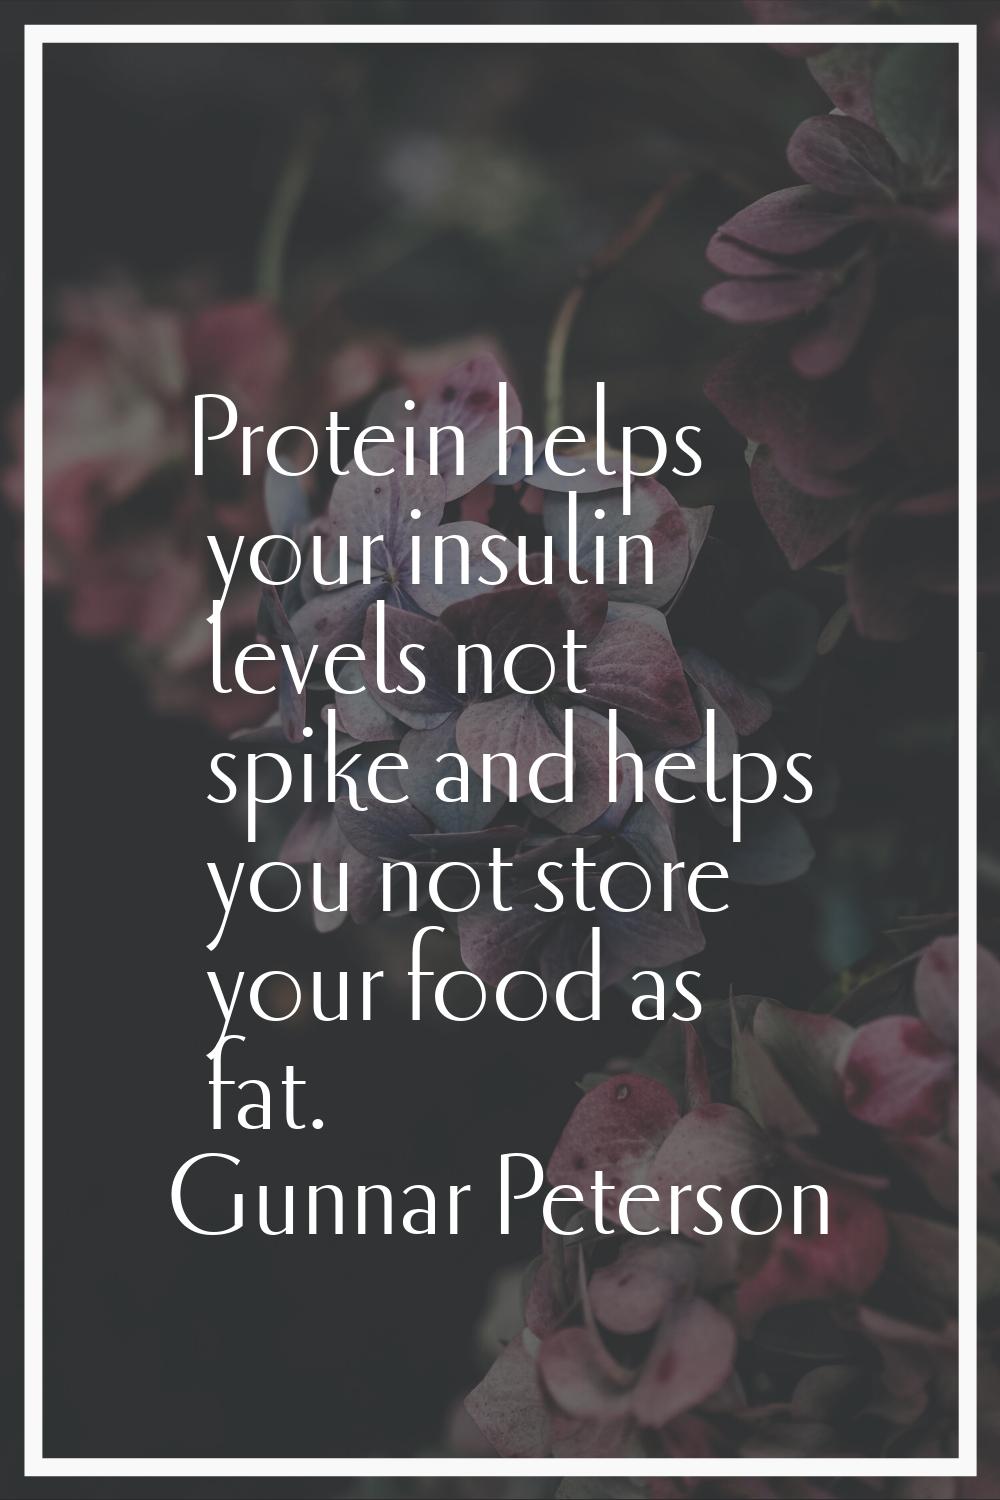 Protein helps your insulin levels not spike and helps you not store your food as fat.